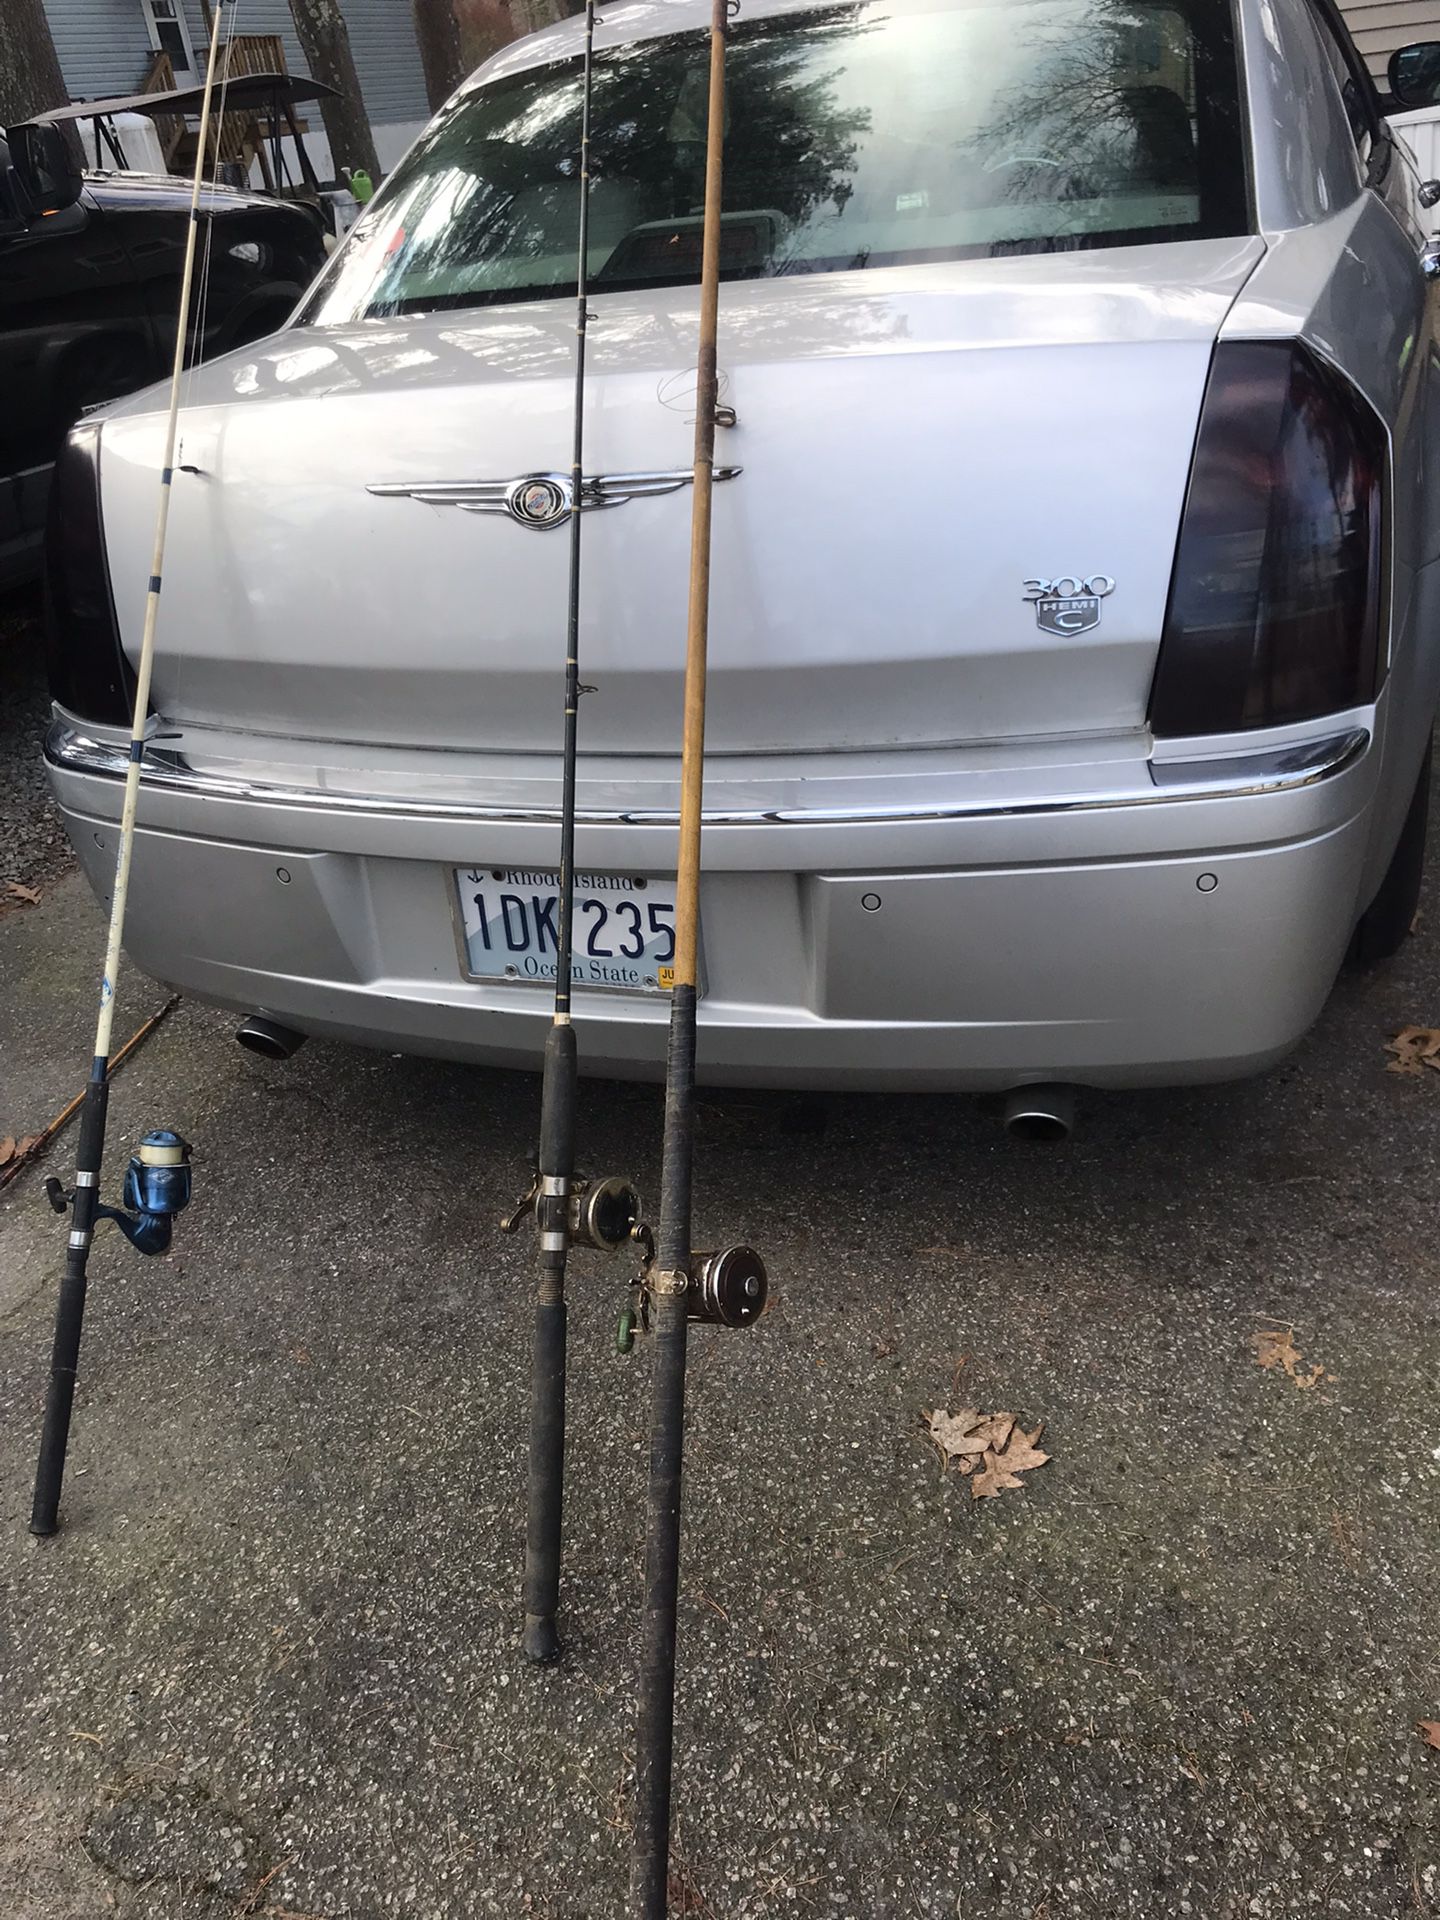 Old School Rods And Penn Reels 